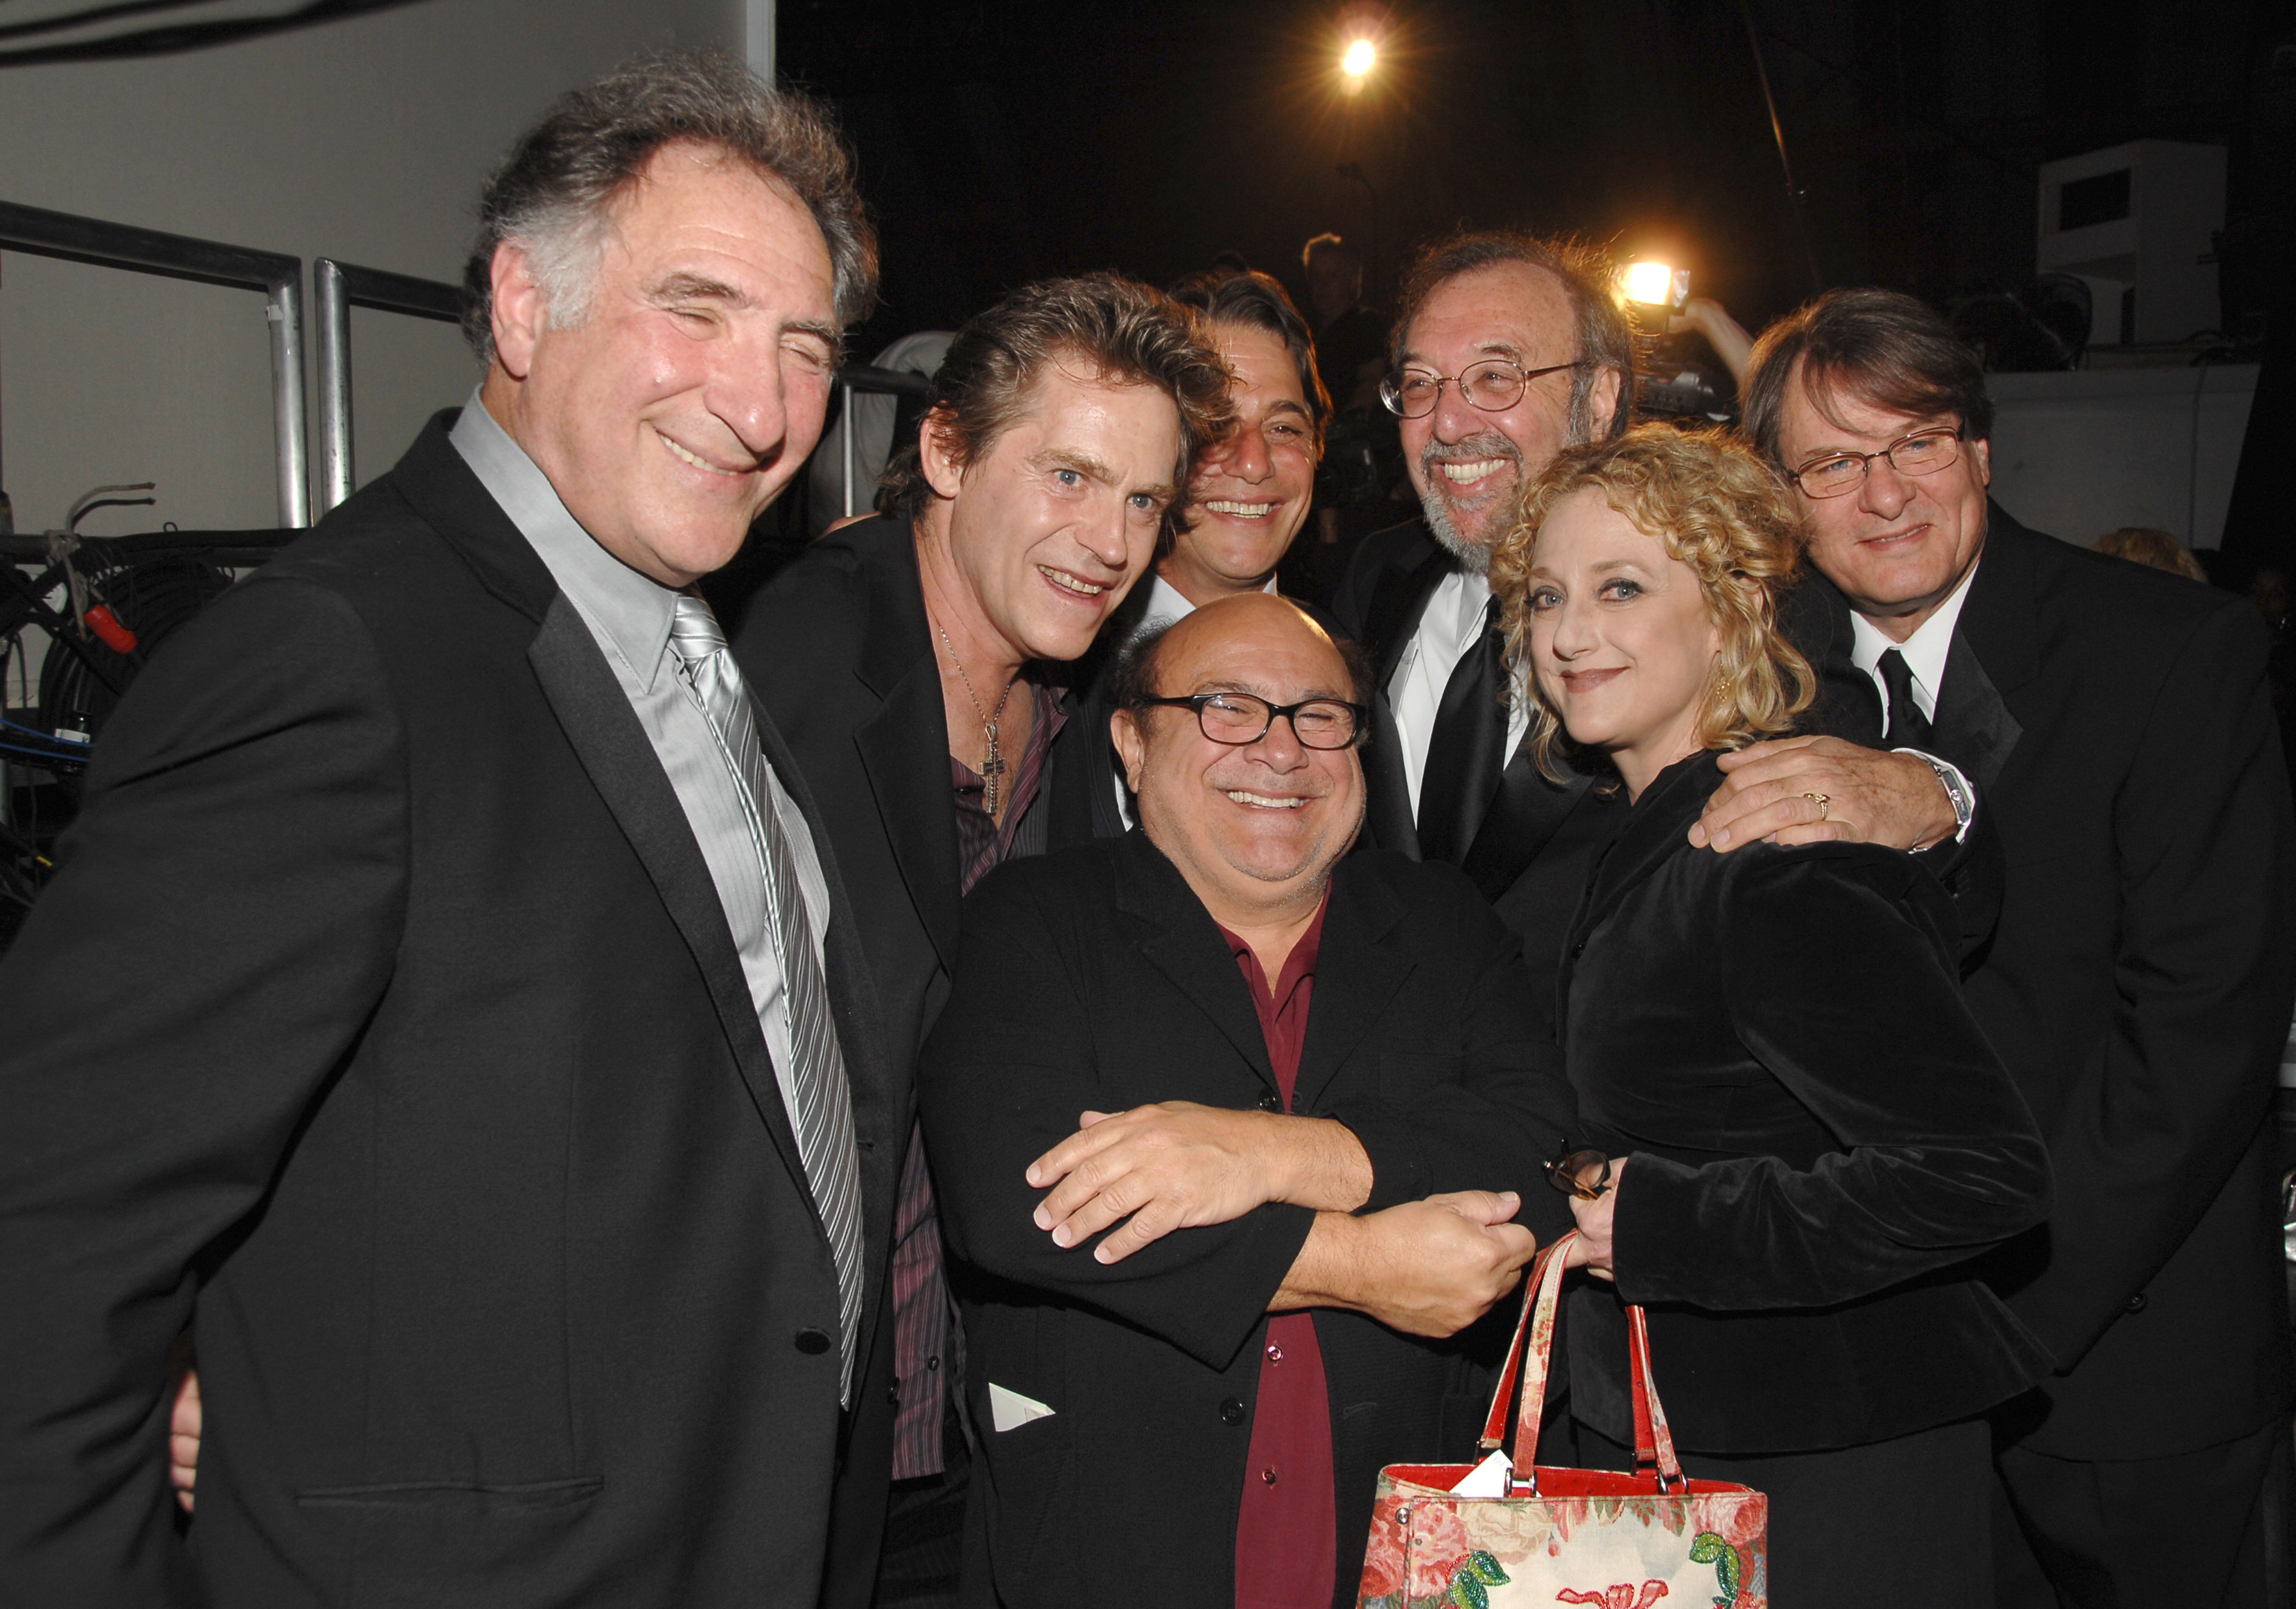 Judd Hirsch, Jeff Conaway, Danny DeVito, Tony Danza, James L. Brooks, and Carol Kane, at the Medallion Award for "Taxi" on April 14, 2007. | Source: Getty Images